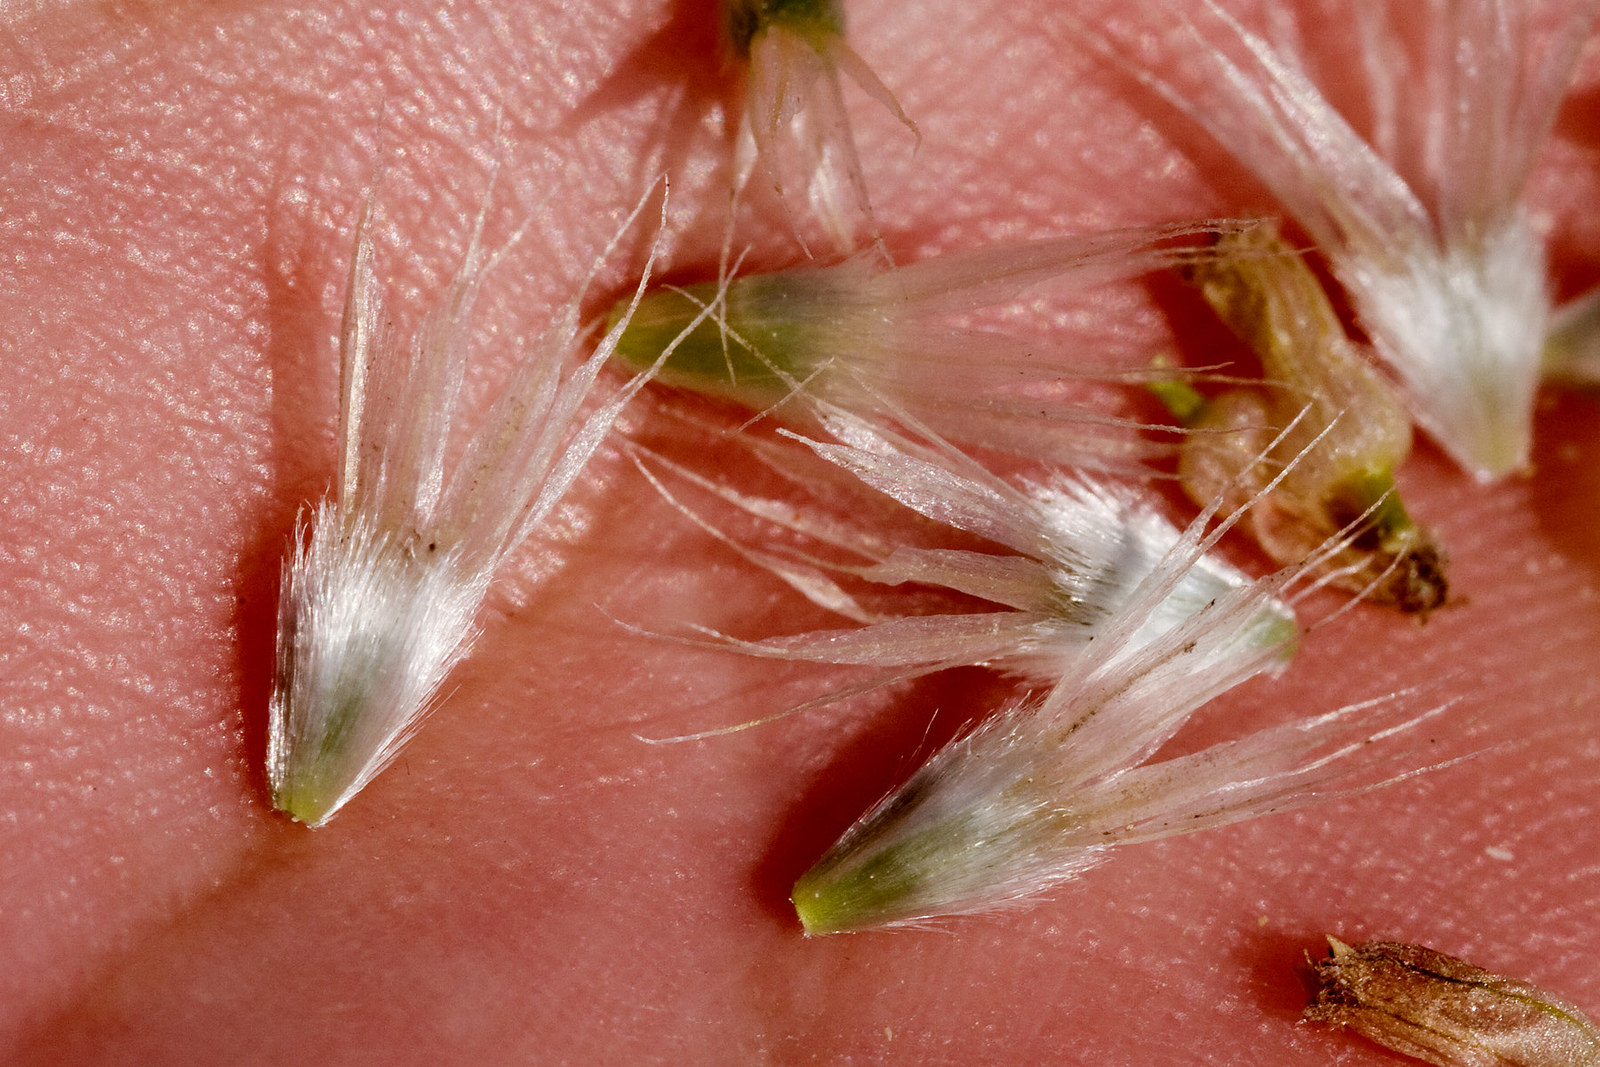 Seeds with white tufts at the ends